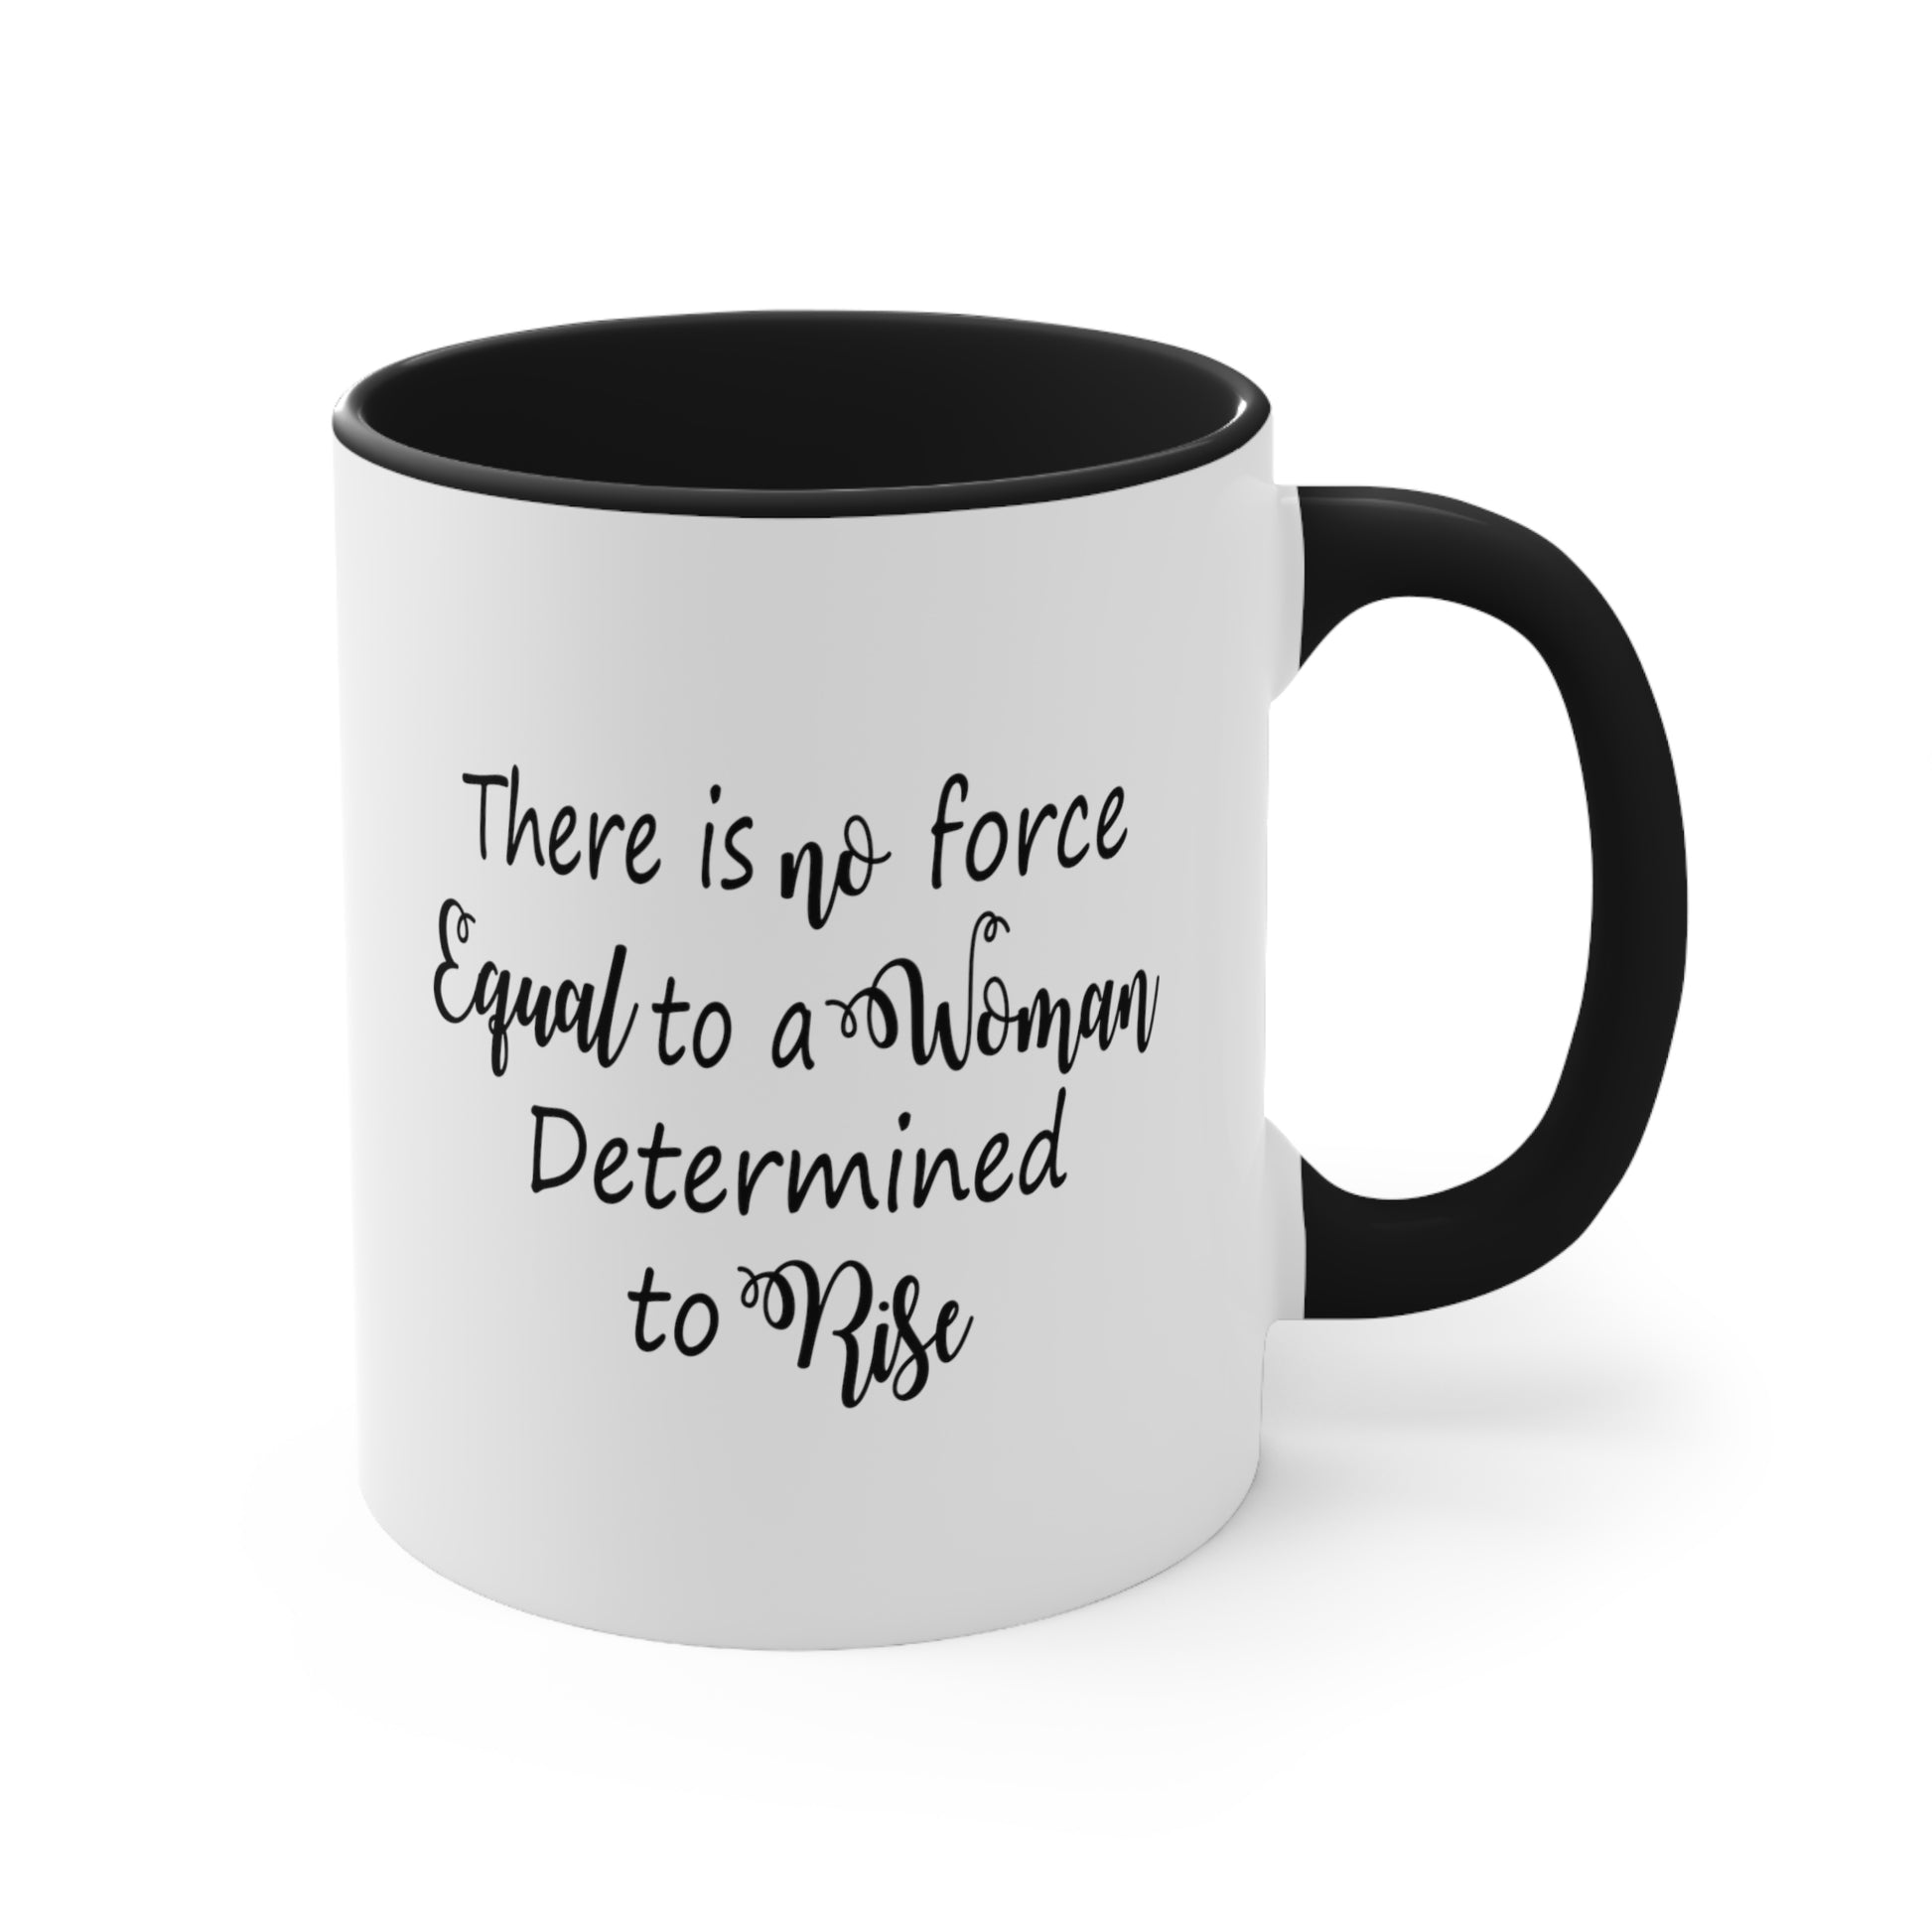 Determined Woman Coffee Mug - Double Sided Black Accent White Ceramic 11oz by TheGlassyLass.com